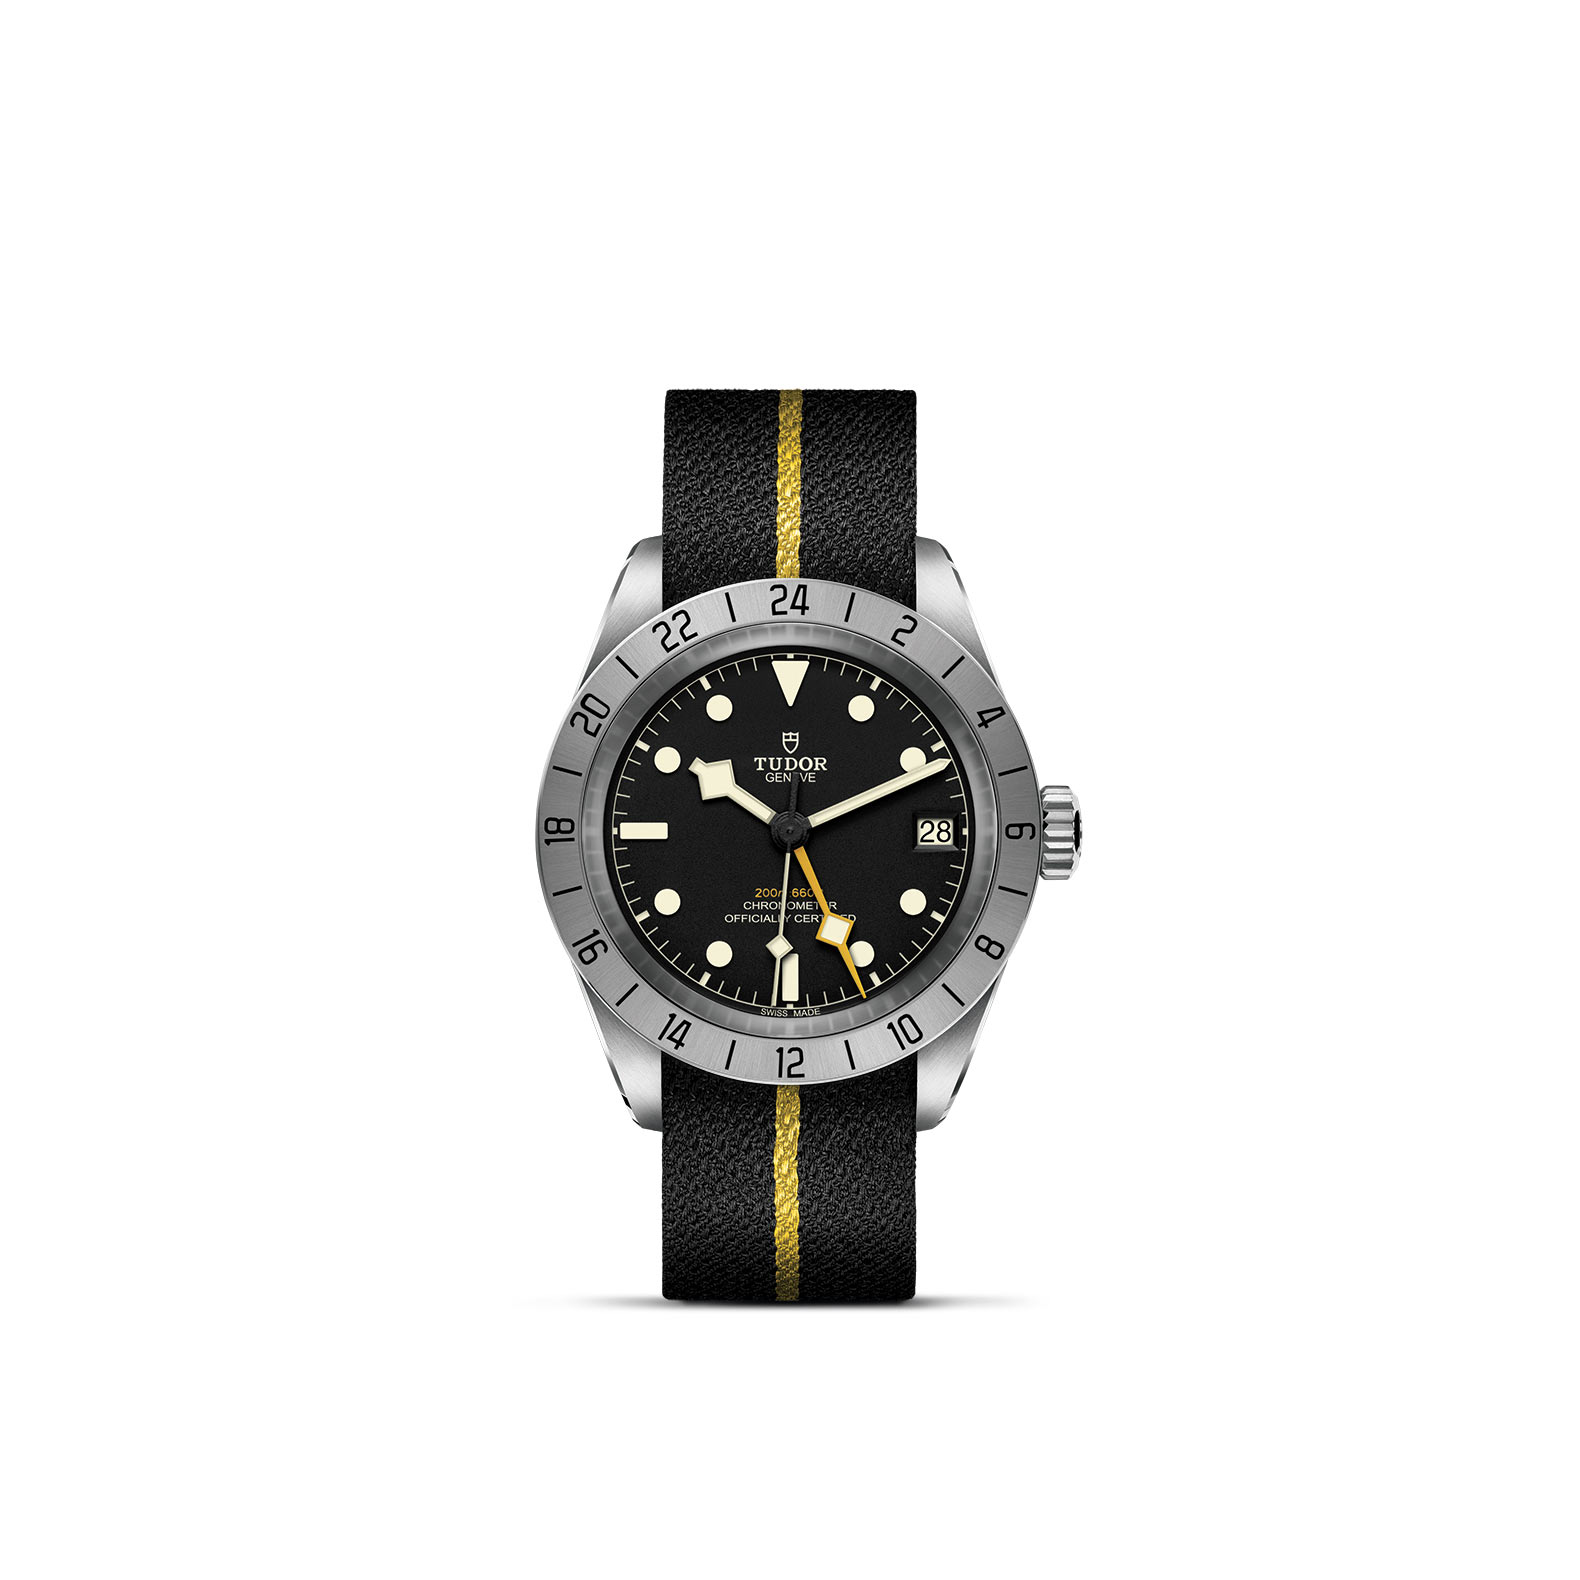 TUDOR BLACK BAY PRO standing upright, highlighting its classic design against a white background.